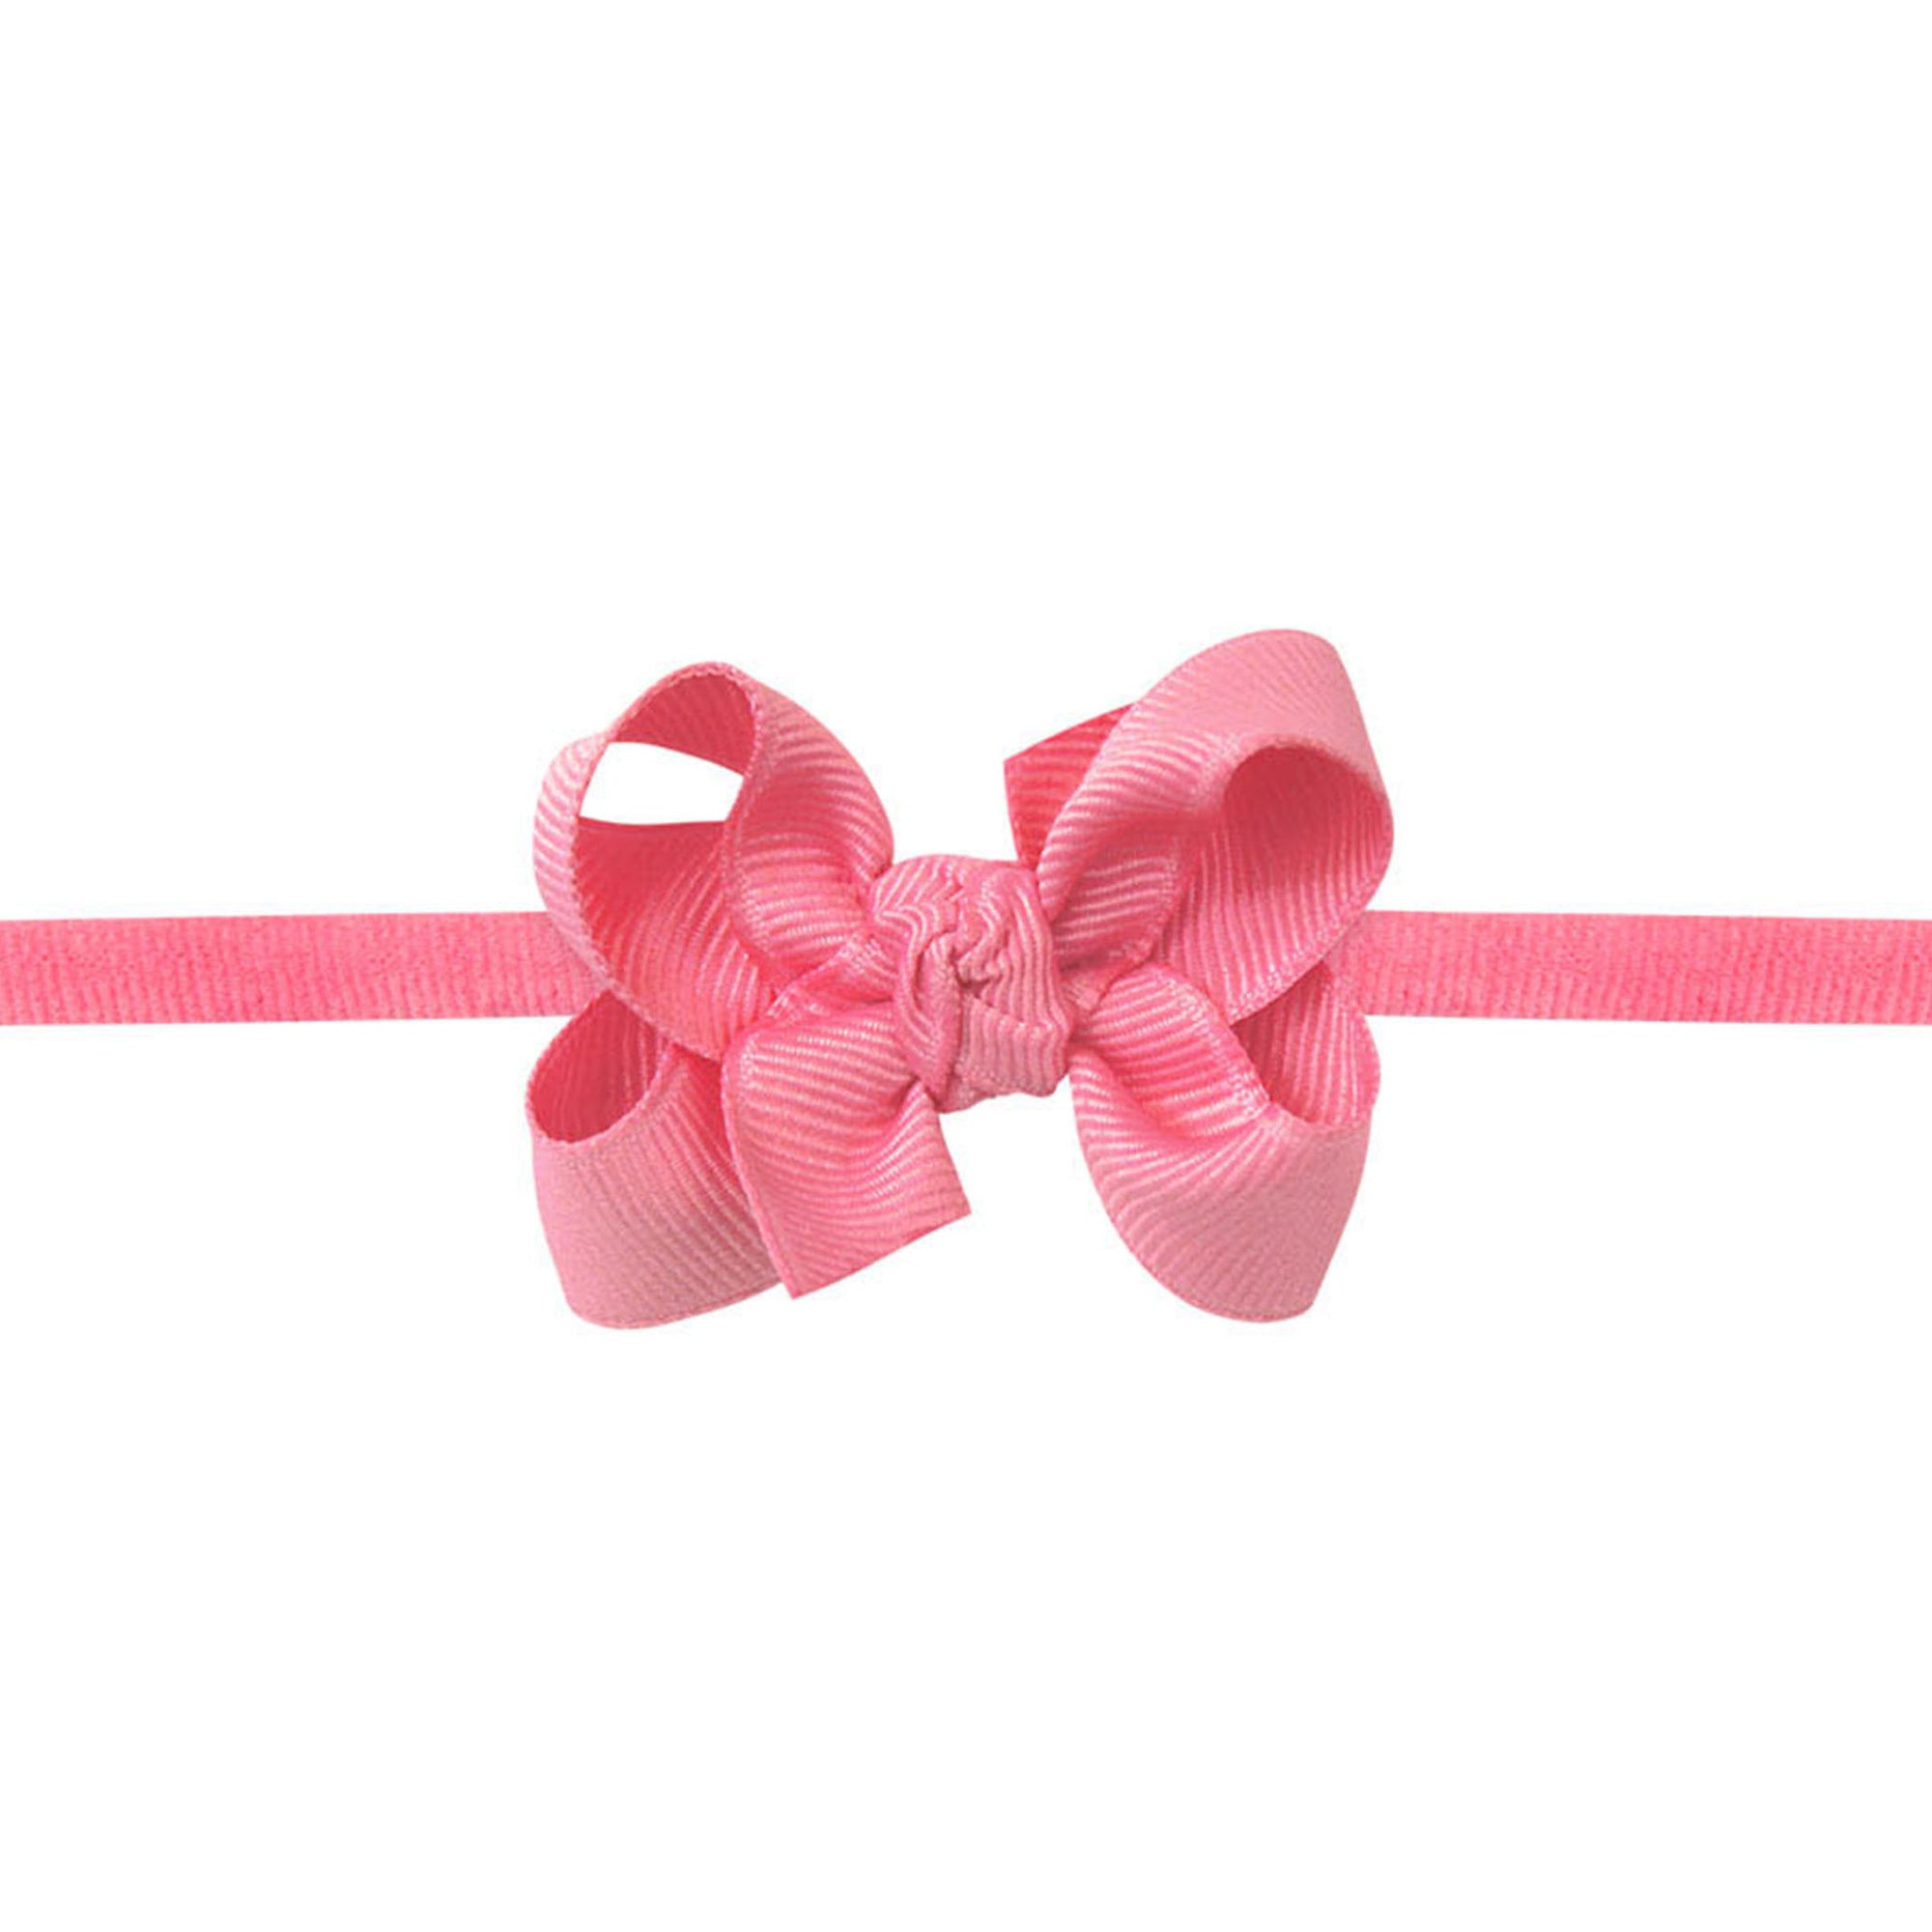 Beyond Creations Hot Pink Baby Headband with Bow